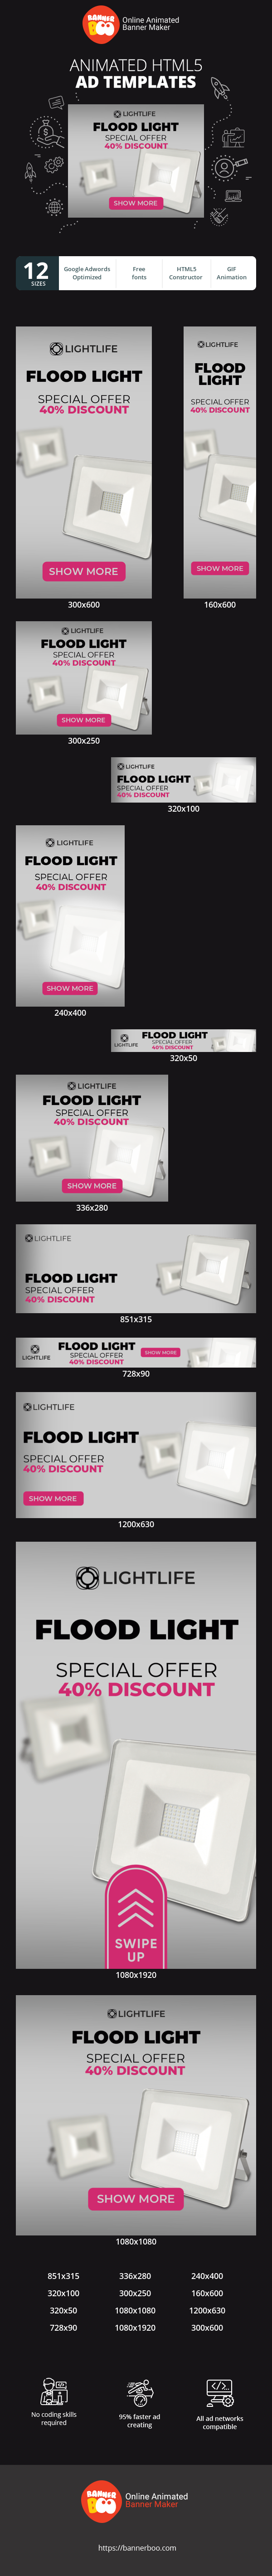 Banner ad template — Flood Light — Special Offer 40% Discount